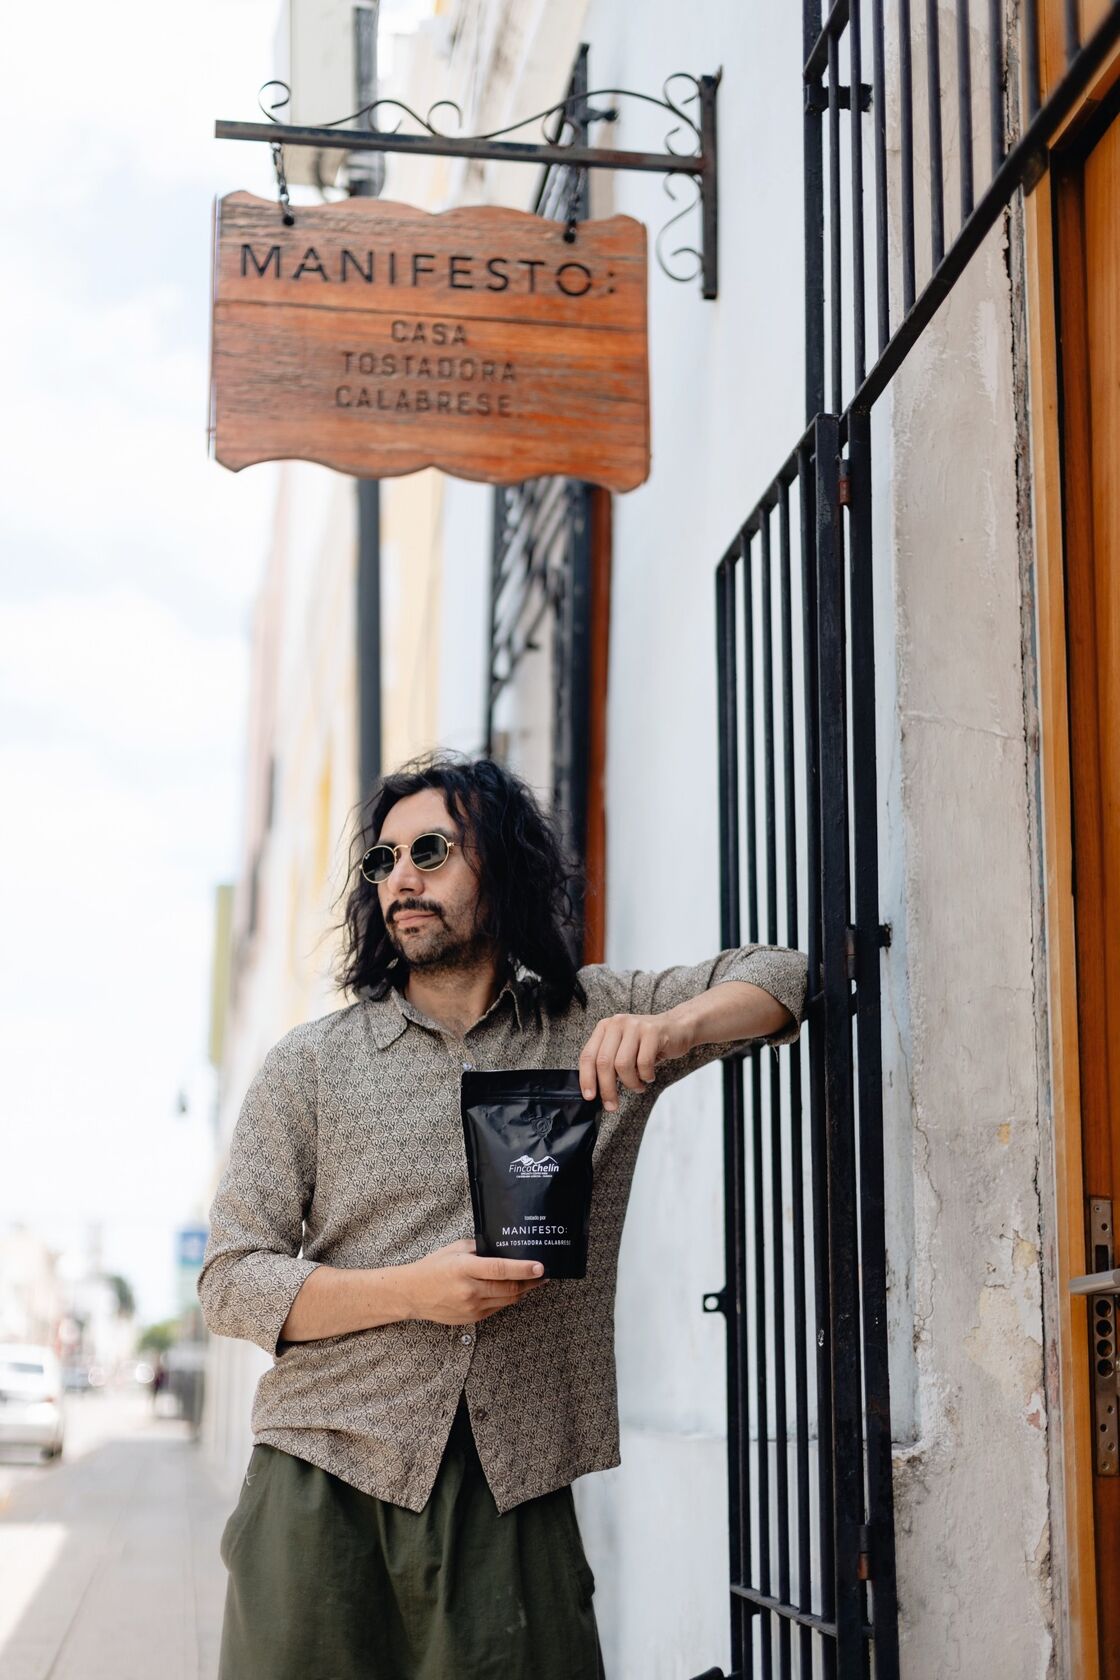 A shaggy man with sunglasses looks away from the camera as he poses with a bag of coffee under the Manifesto Coffee Roasters sign.